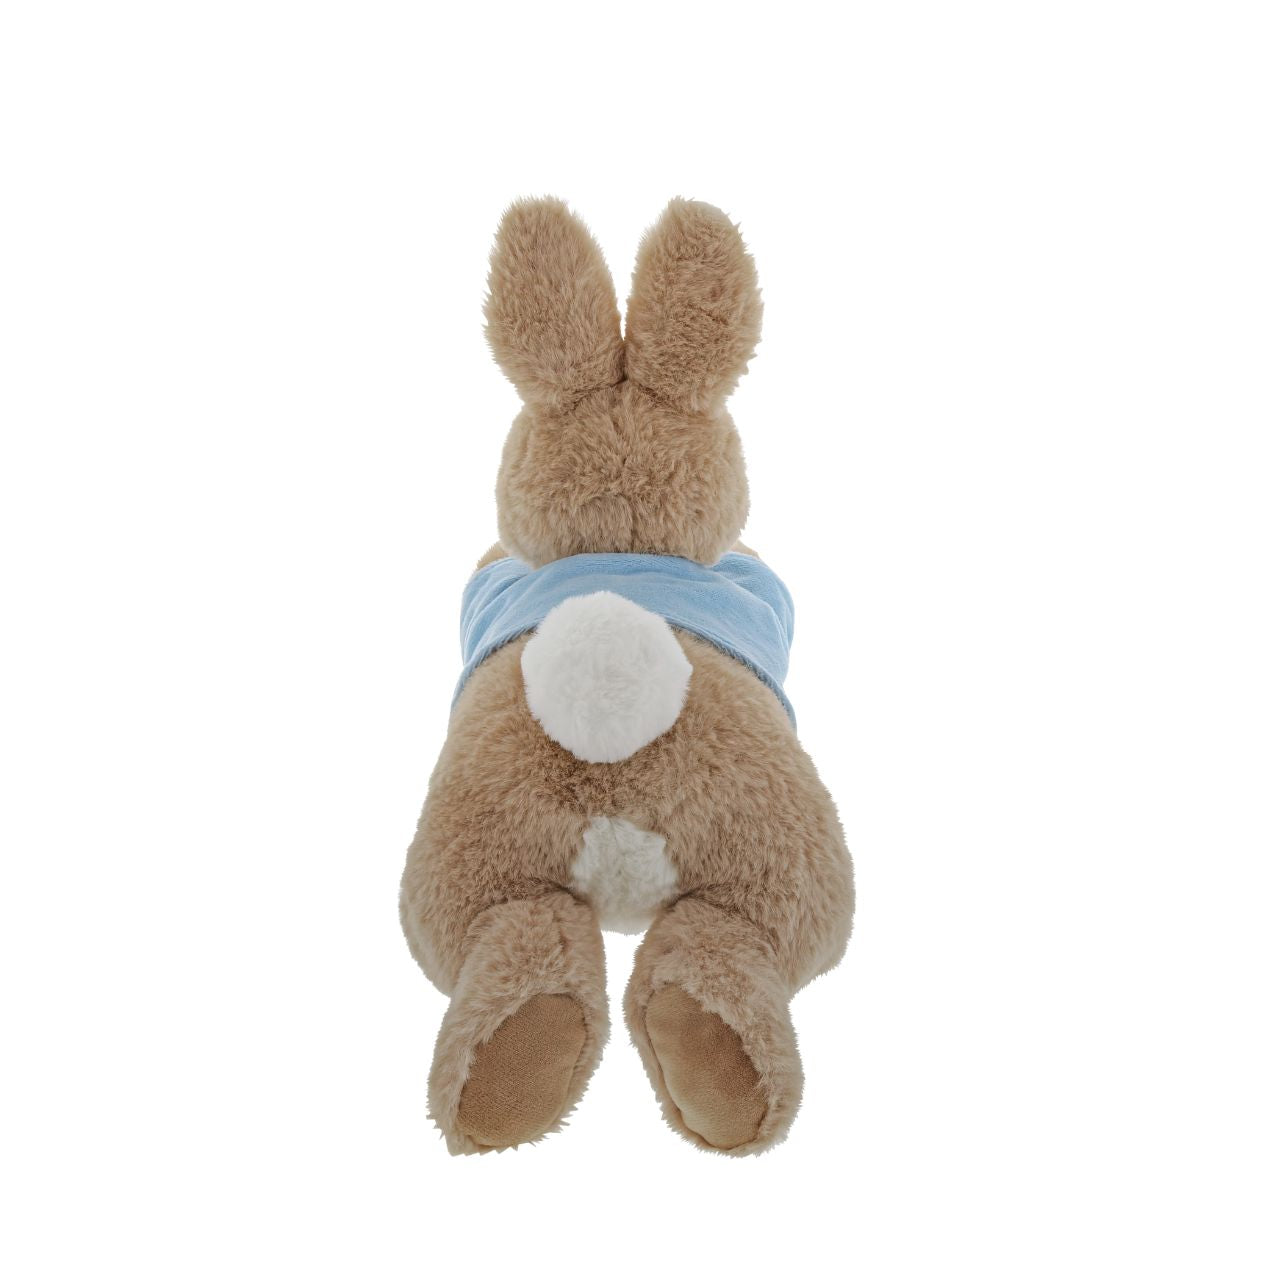 This Peter Rabbit soft toy is made from beautifully soft fabric and is dressed in clothing exactly as illustrated by Beatrix Potter, with his signature blue jacket and a new dynamic pose. The Peter Rabbit collection features the much loved characters from the Beatrix Potter books and this quality and authentic soft toy is sure to be adored for many years to come.